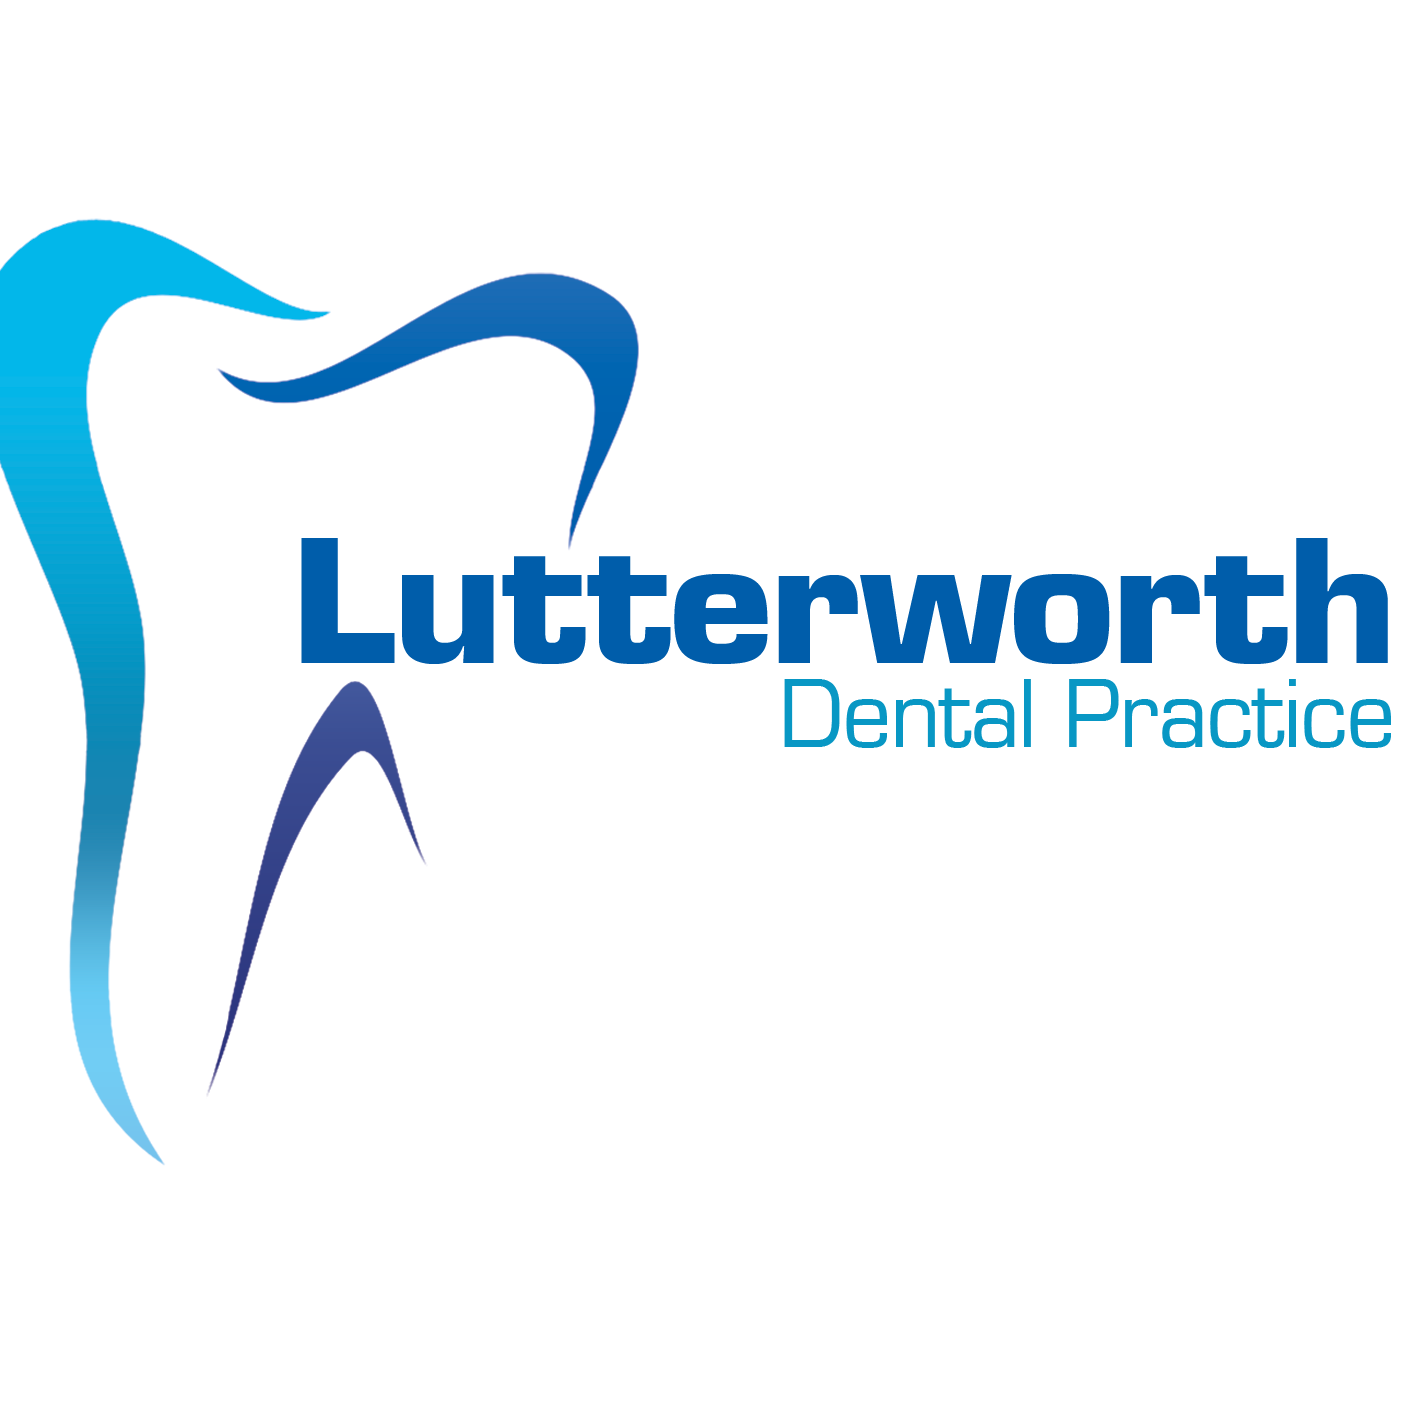 Lutterworth Dental Practice: Providing NHS, Private and Cosmetic dentistry Smile with Confidence :-) Lutterworthdental@gmail.com